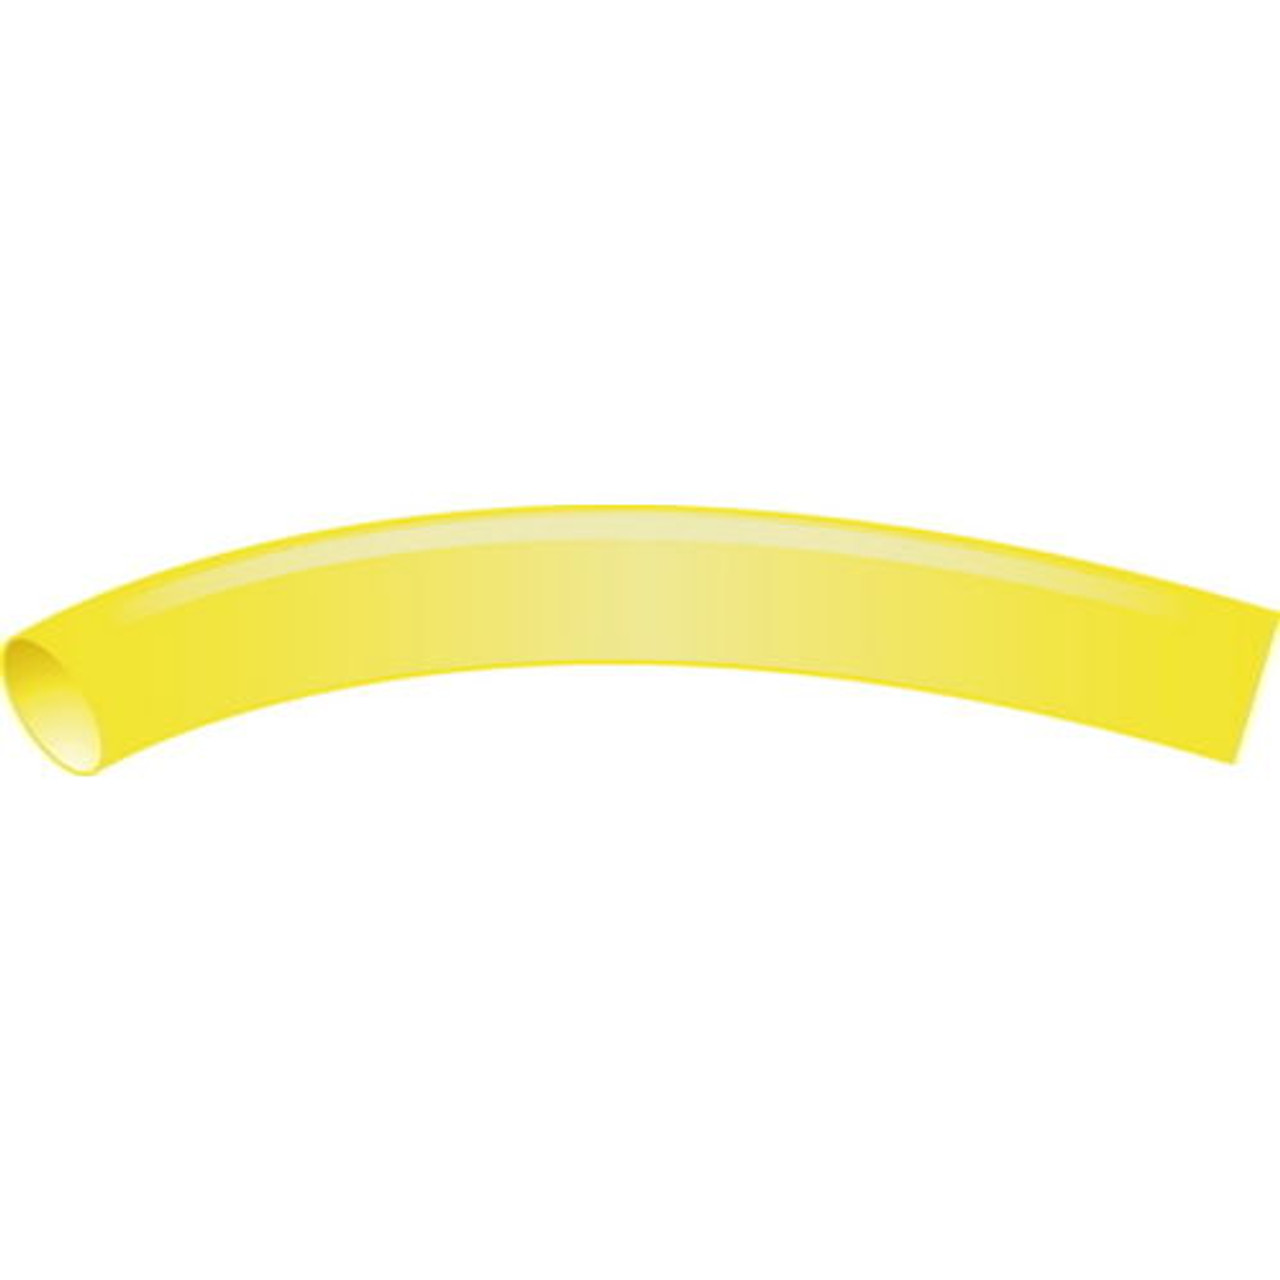 Yellow 3/16 Inch x 48 Inch 3:1 Heat Shrink Tubing with Sealant for Boats